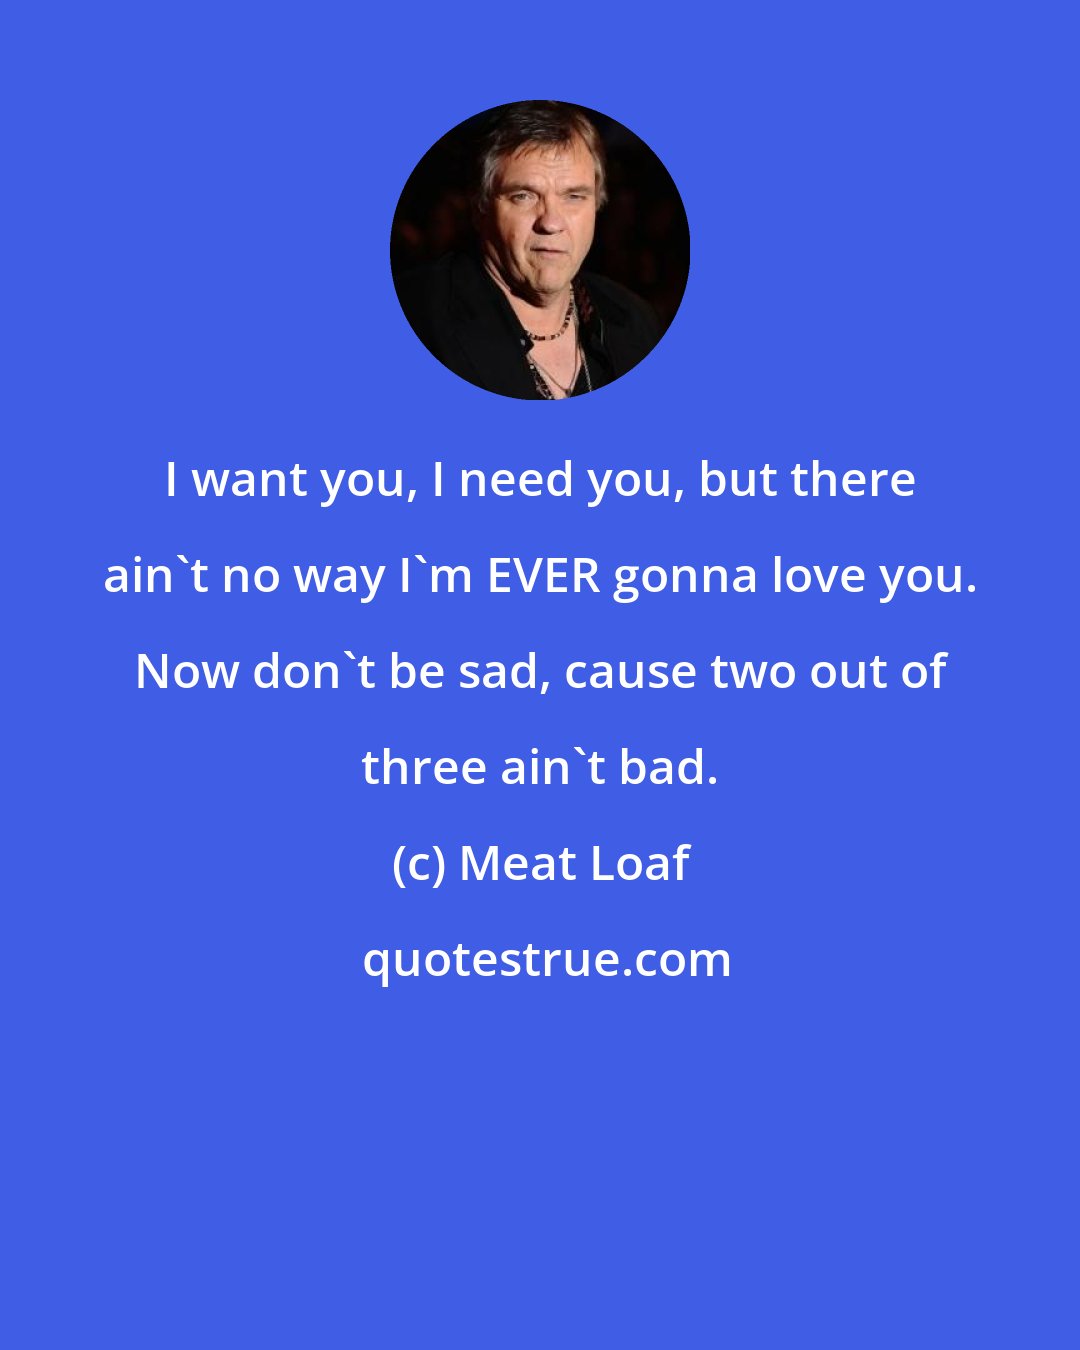 Meat Loaf: I want you, I need you, but there ain't no way I'm EVER gonna love you. Now don't be sad, cause two out of three ain't bad.